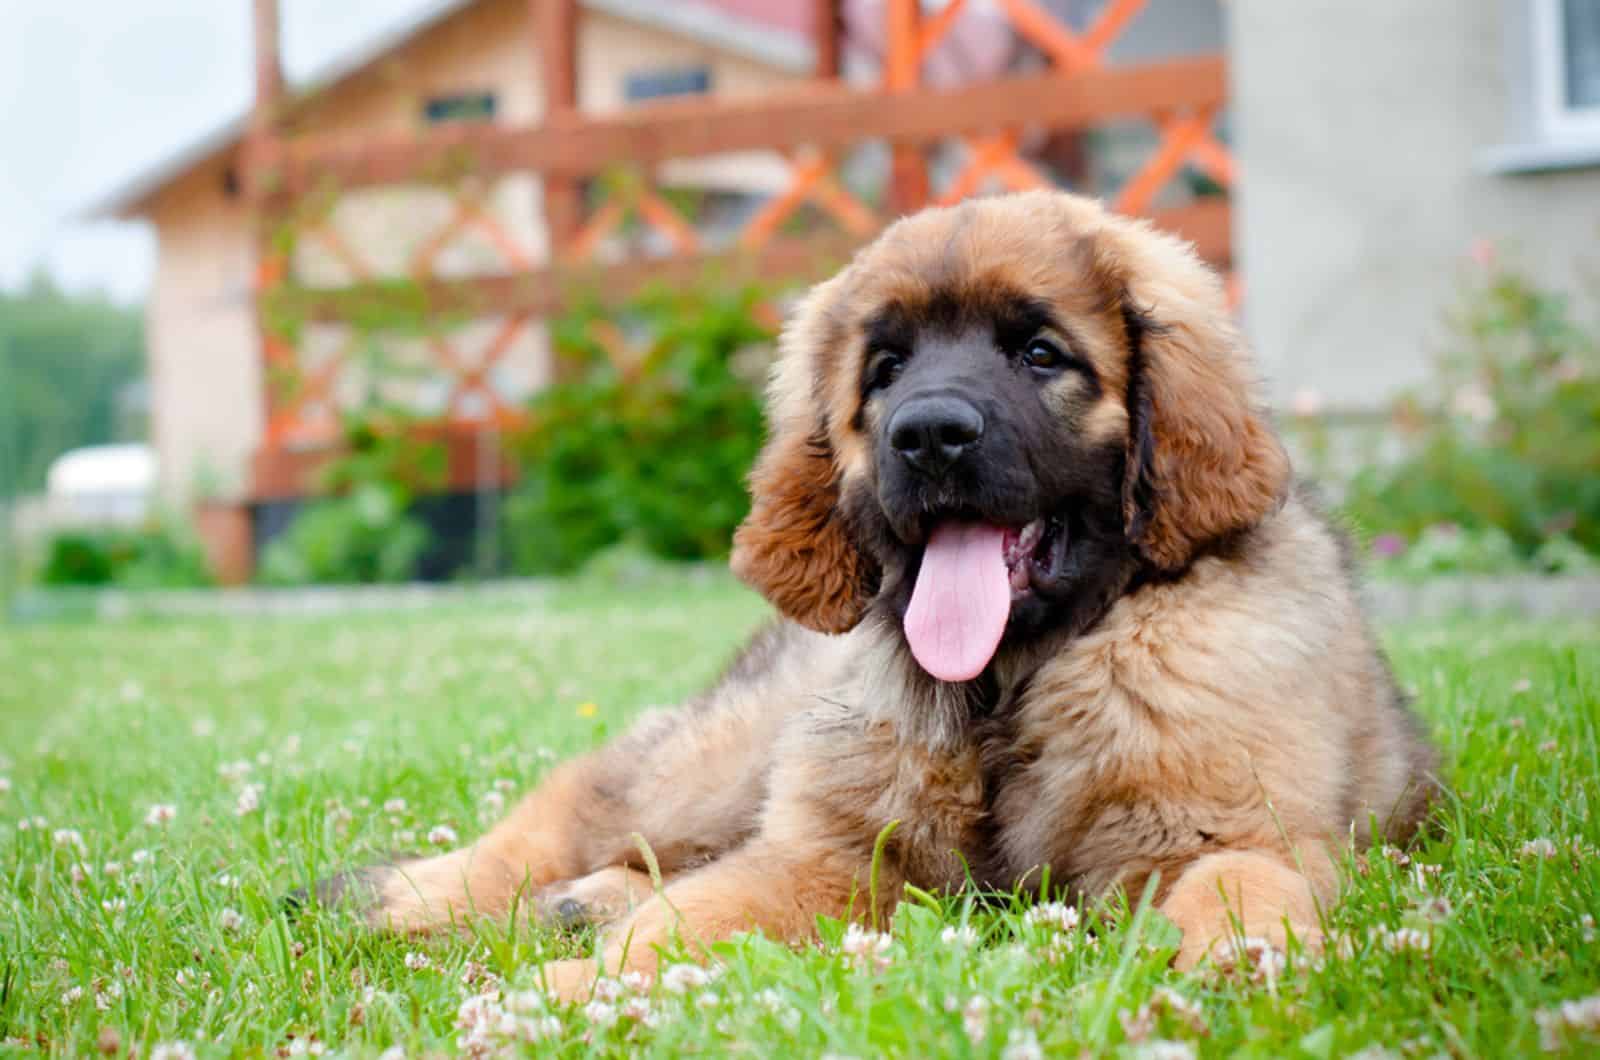 leonberger puppy resting in the yard